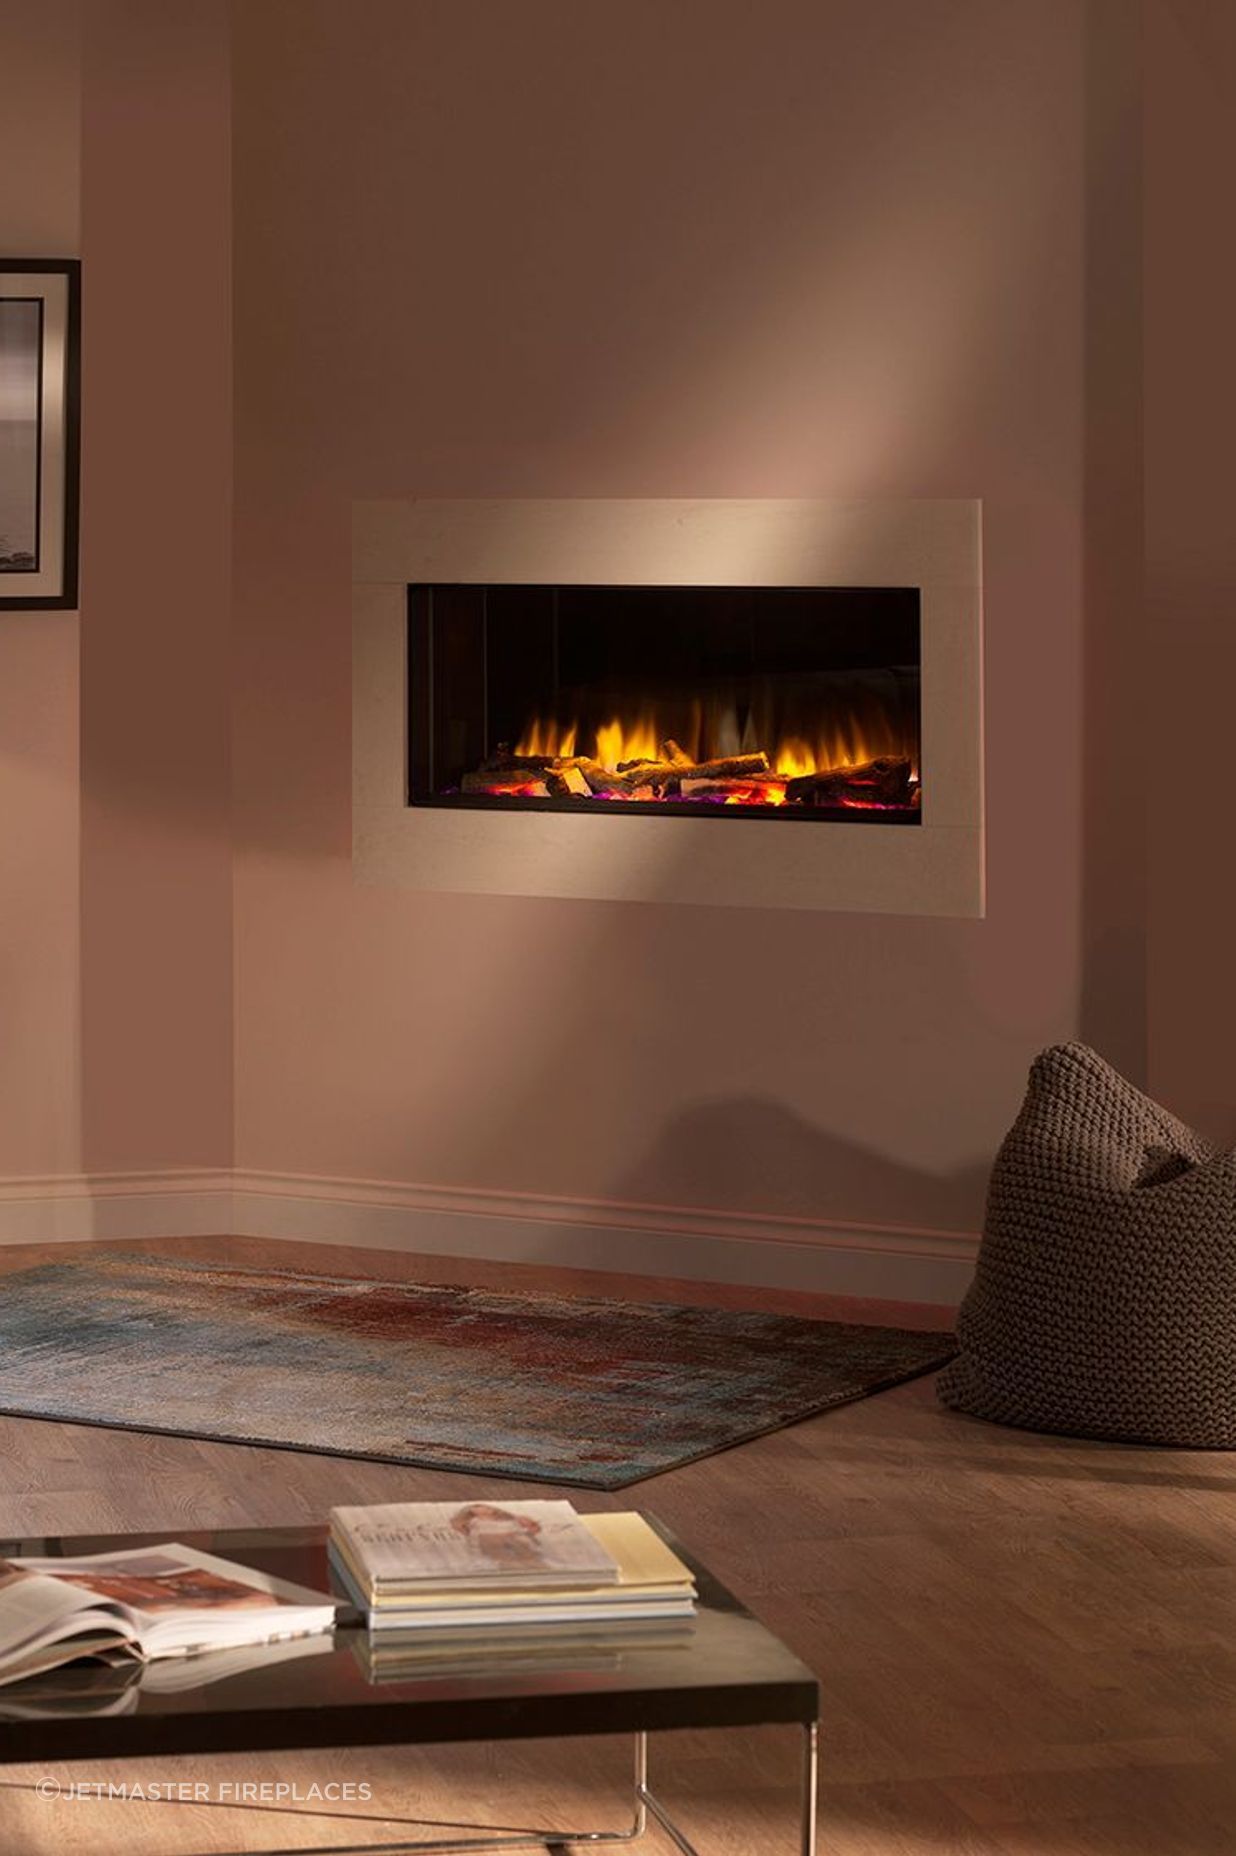 Anti-reflective windows ensure a clear view of the 1000E Electric Fireplace from every angle.